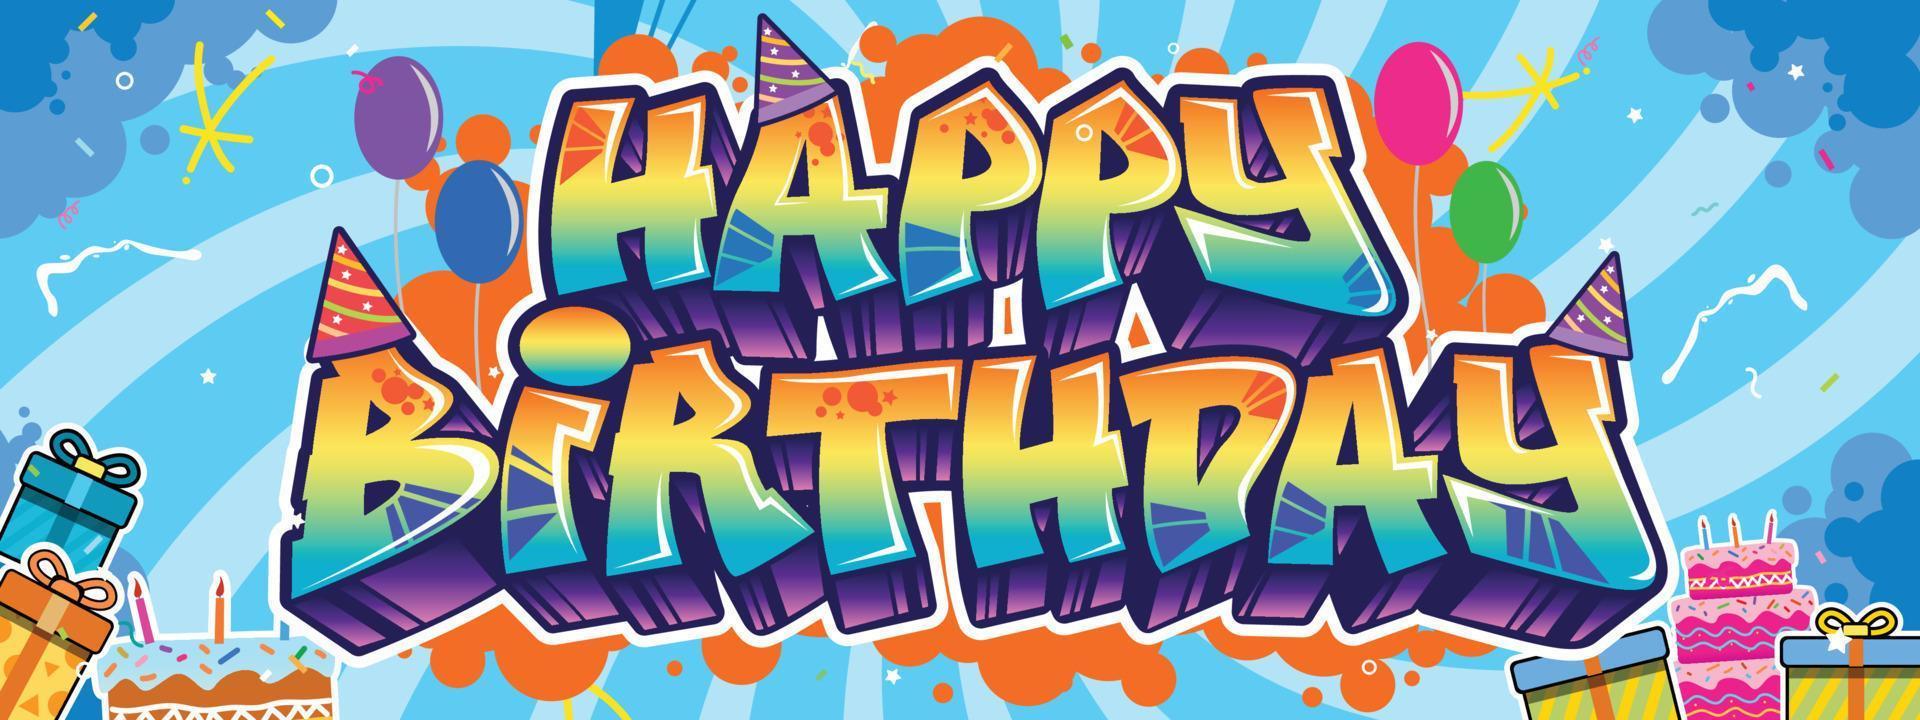 Happy Birthday greeting text in graffiti style. Colorful street art theme illustration, Social media design, greeting, poster with vibrant color for wall art and background vector